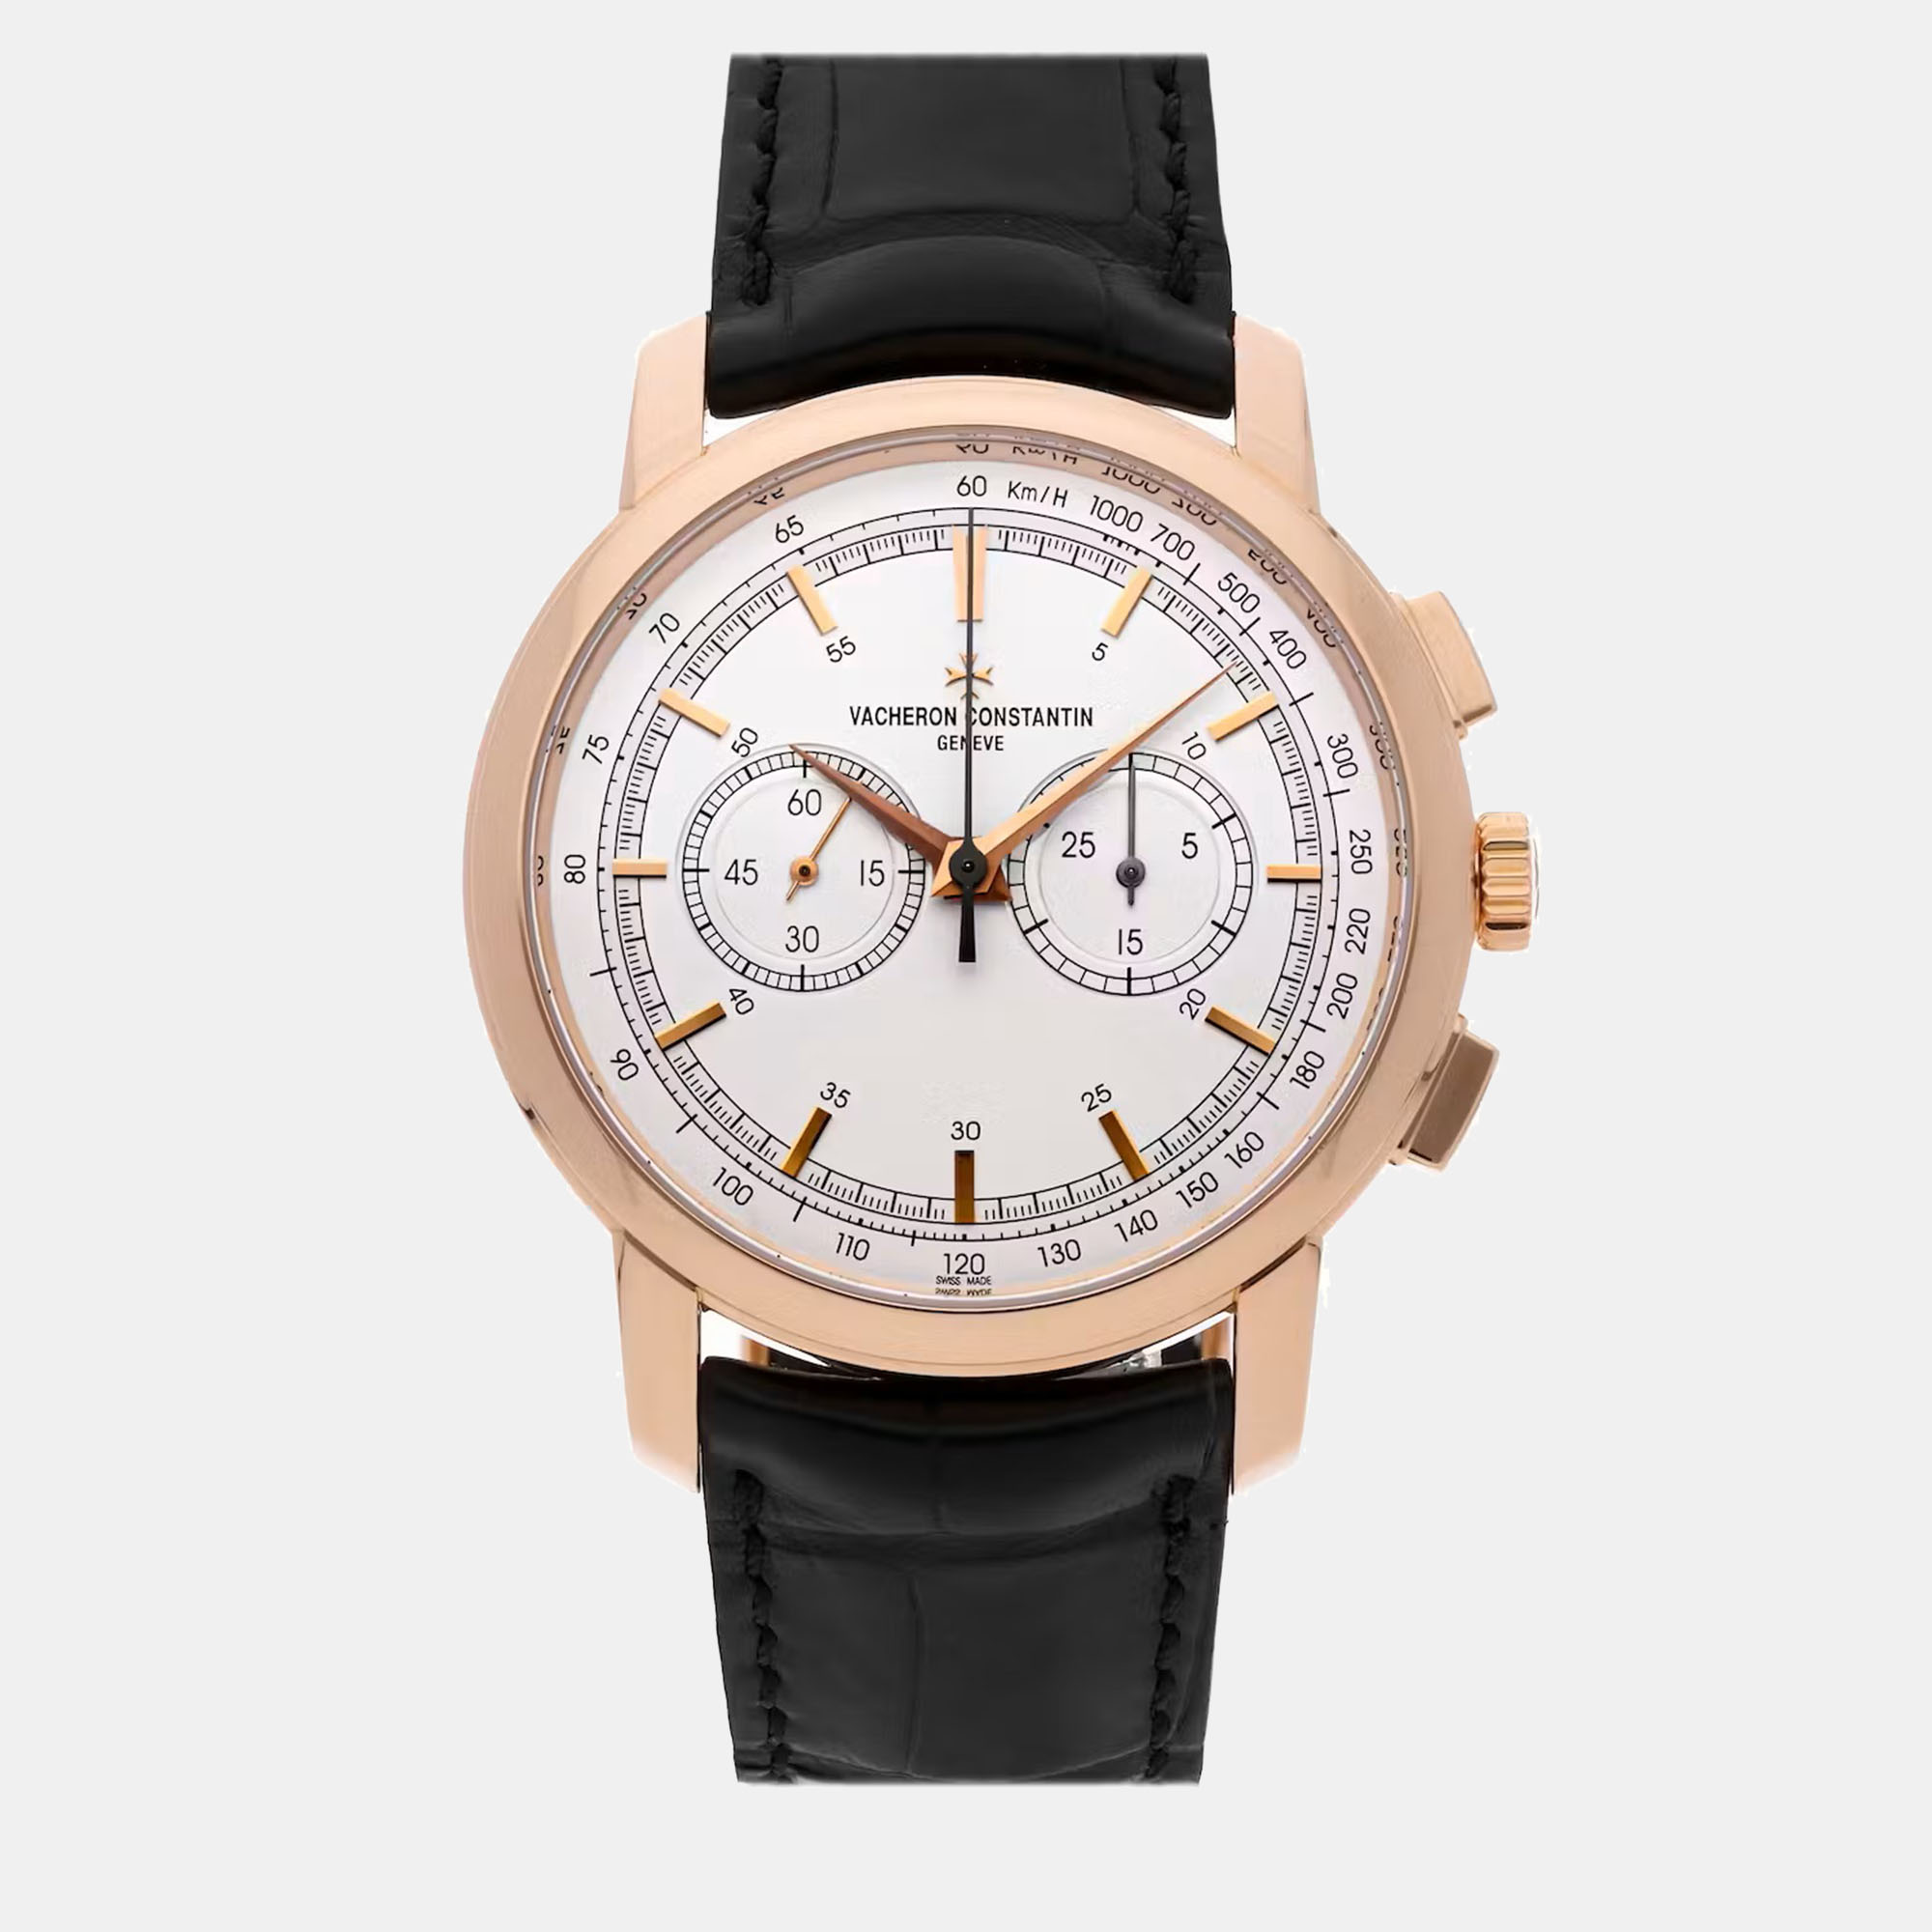 Sophisticated design and traditions of fine watchmaking characterize this authentic designer timepiece. Grace your wrist with Vacheron Constantin luxurious piece and instantly elevate your day.